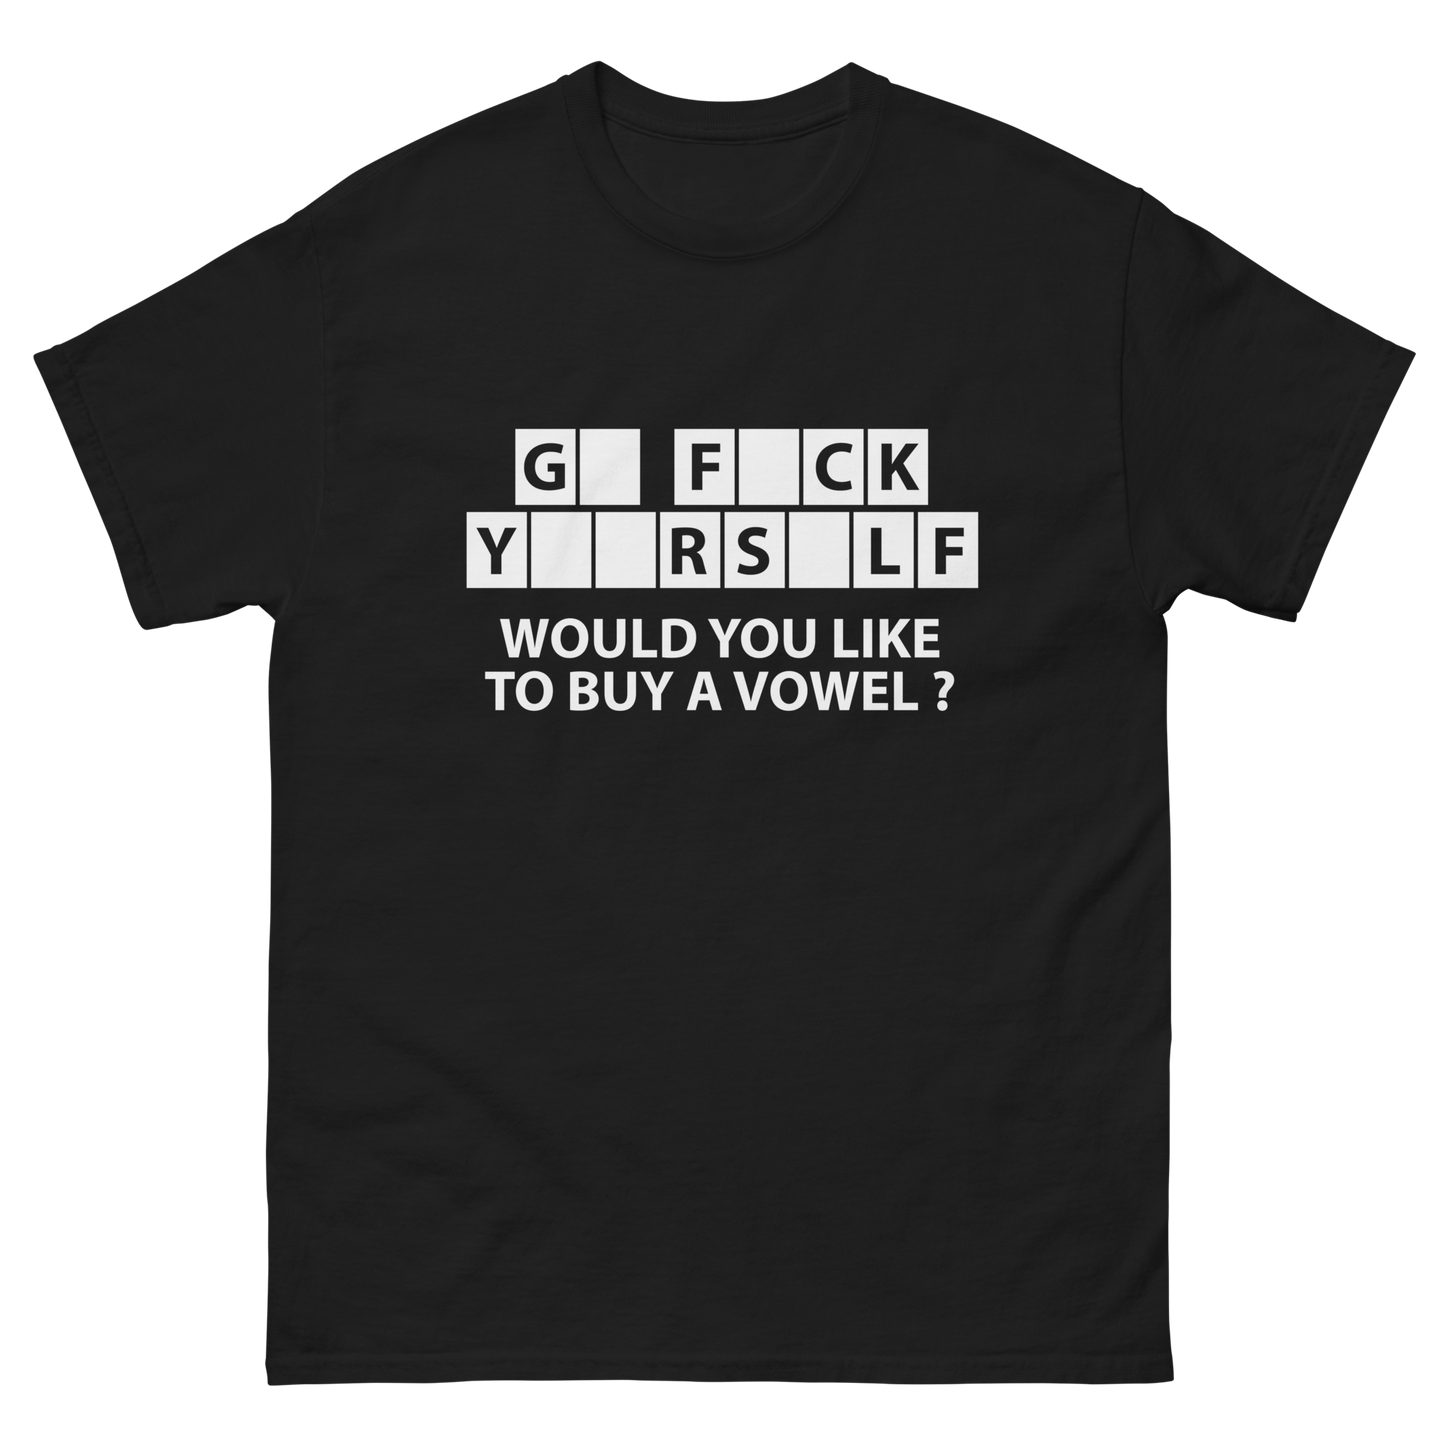 Go F*ck Yourself Would You Like To Buy A Vowel T-Shirt